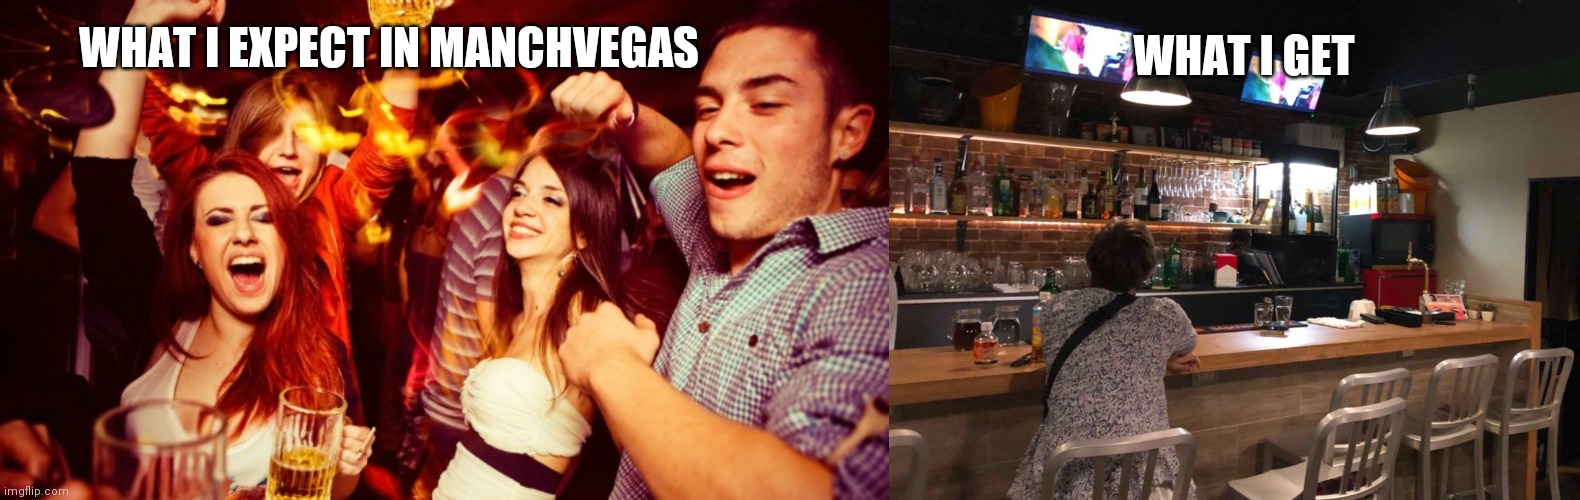 Club life | WHAT I GET; WHAT I EXPECT IN MANCHVEGAS | image tagged in memes | made w/ Imgflip meme maker